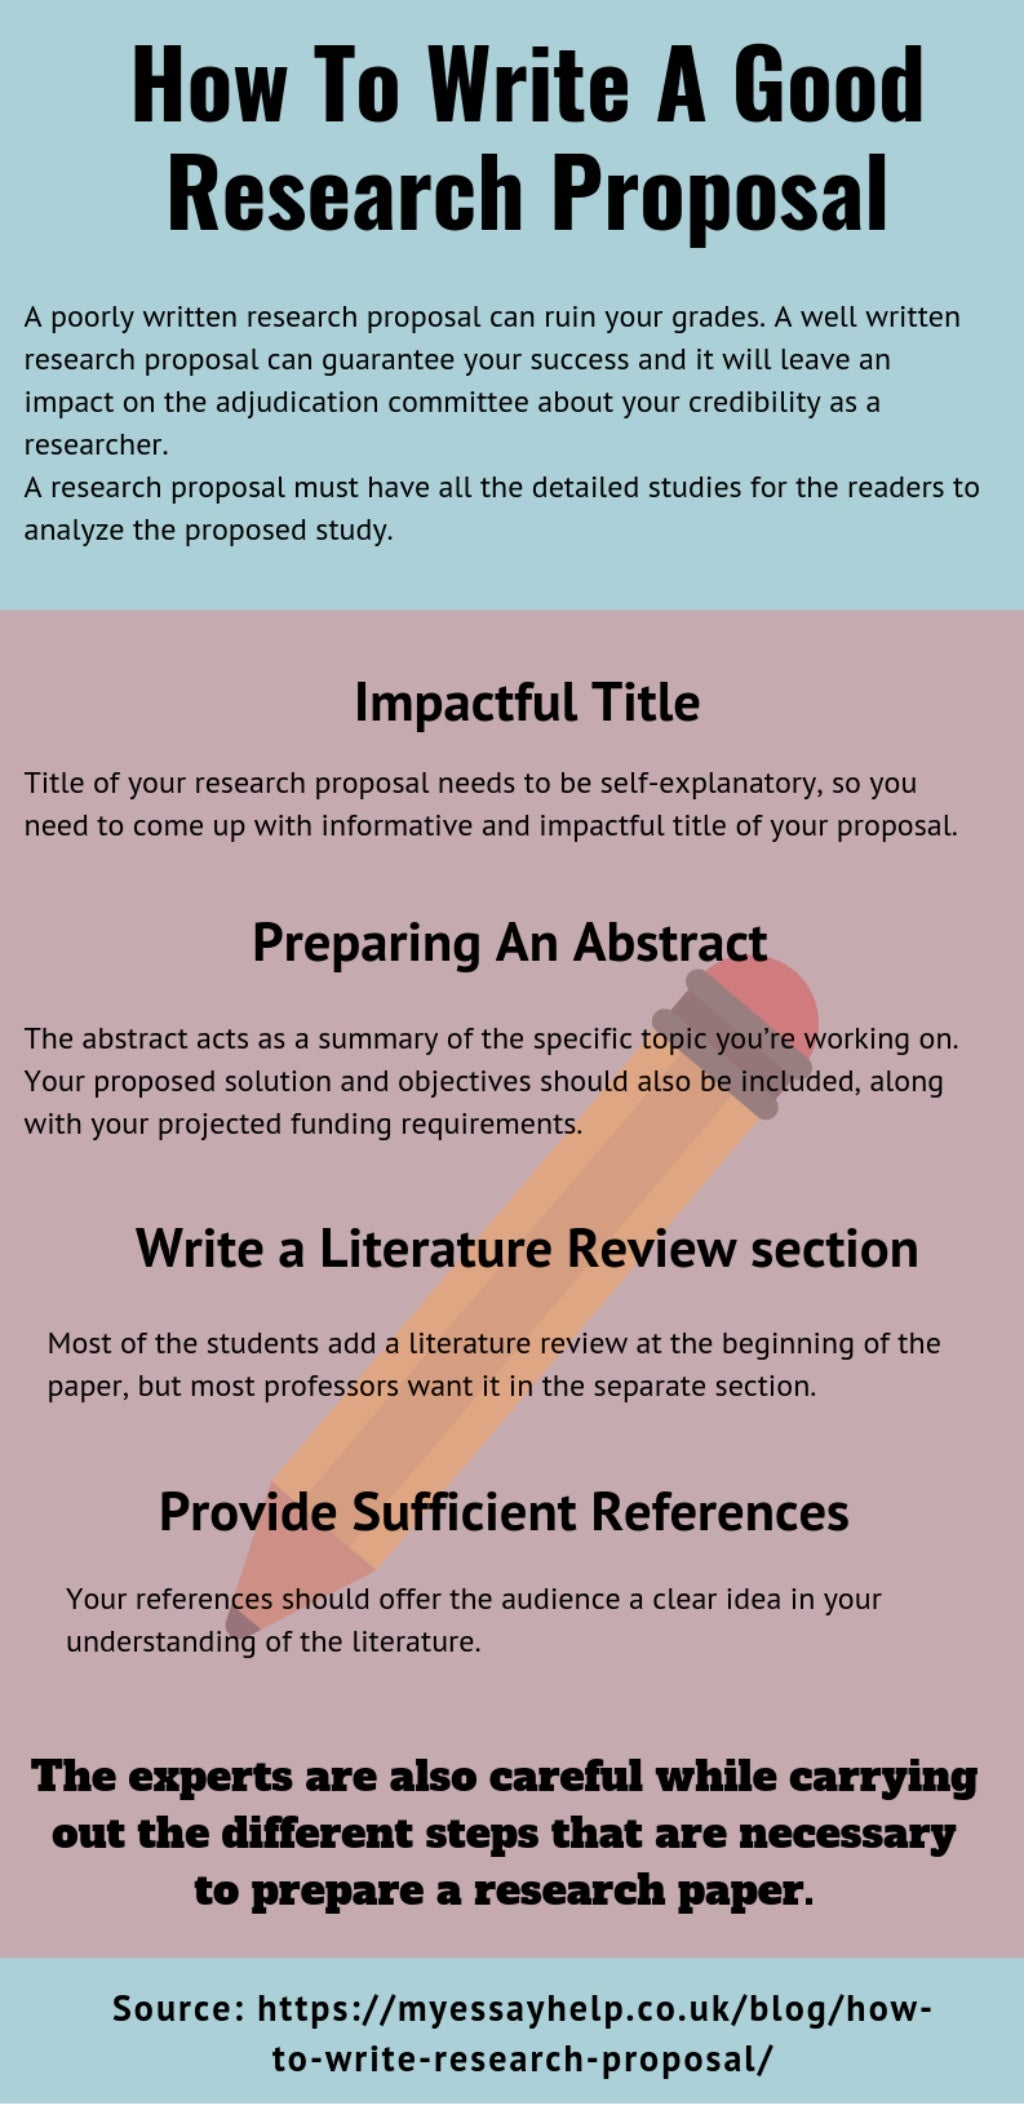 what are the elements of a good research proposal